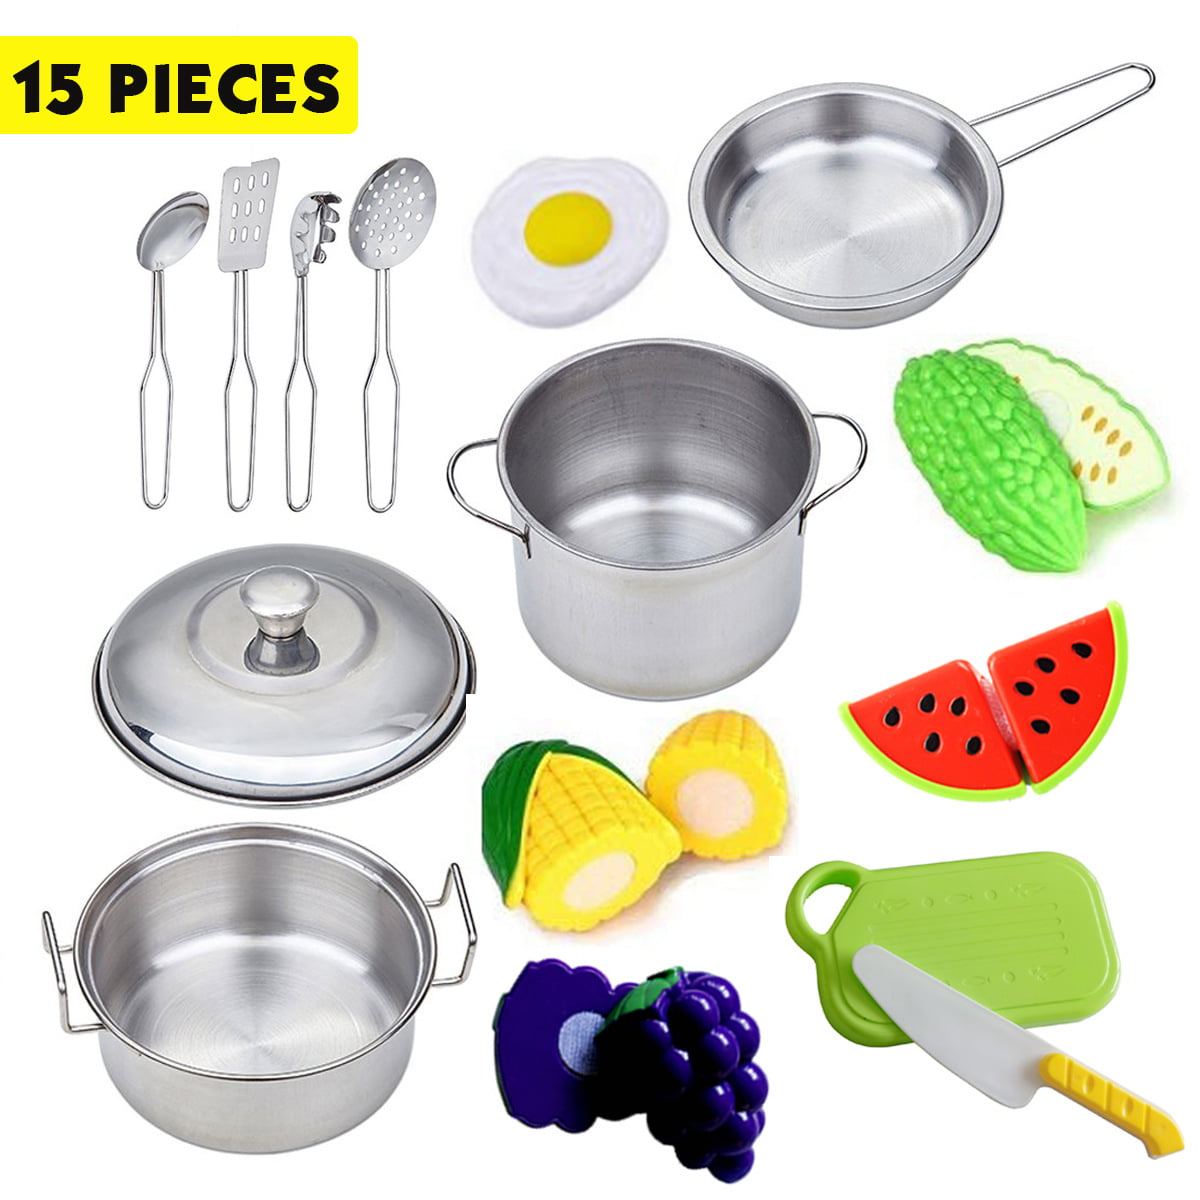 16pcs Stainless Steel Pots and Pans Cookware Pretend Kitchen Play Set for Kids 